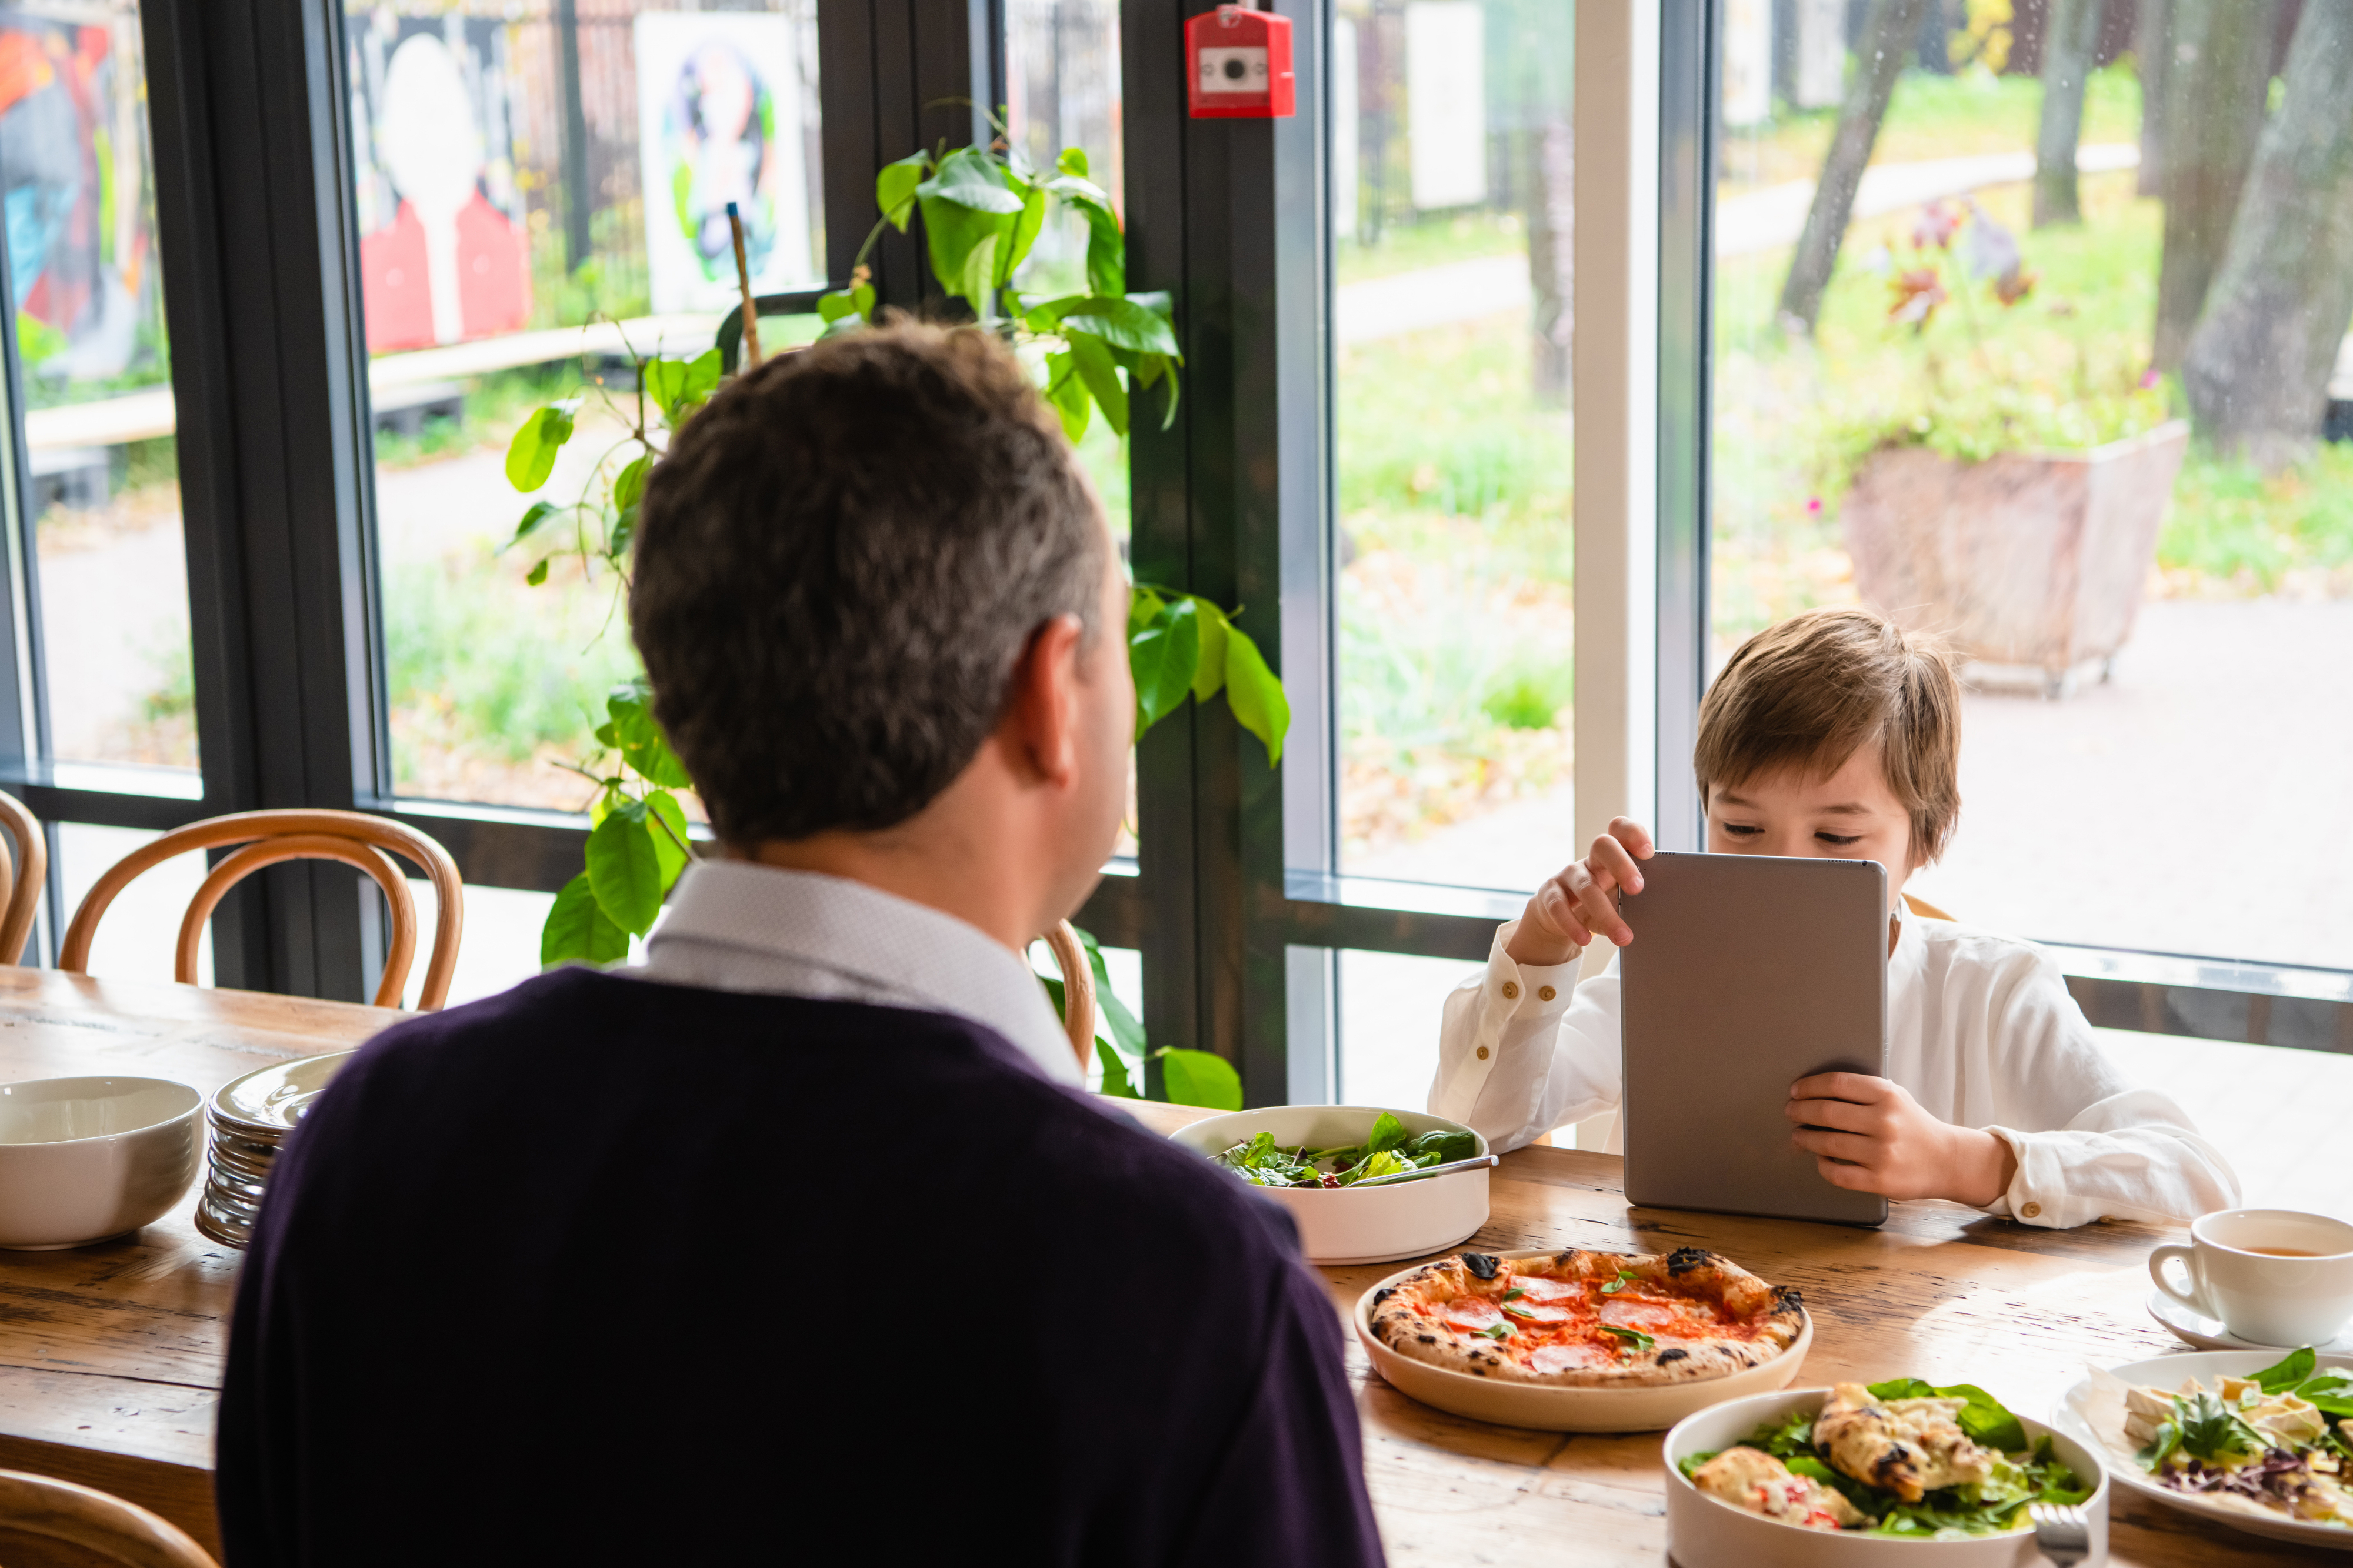 Two individuals at a restaurant table, one using a tablet, with pizza and salads in front of them